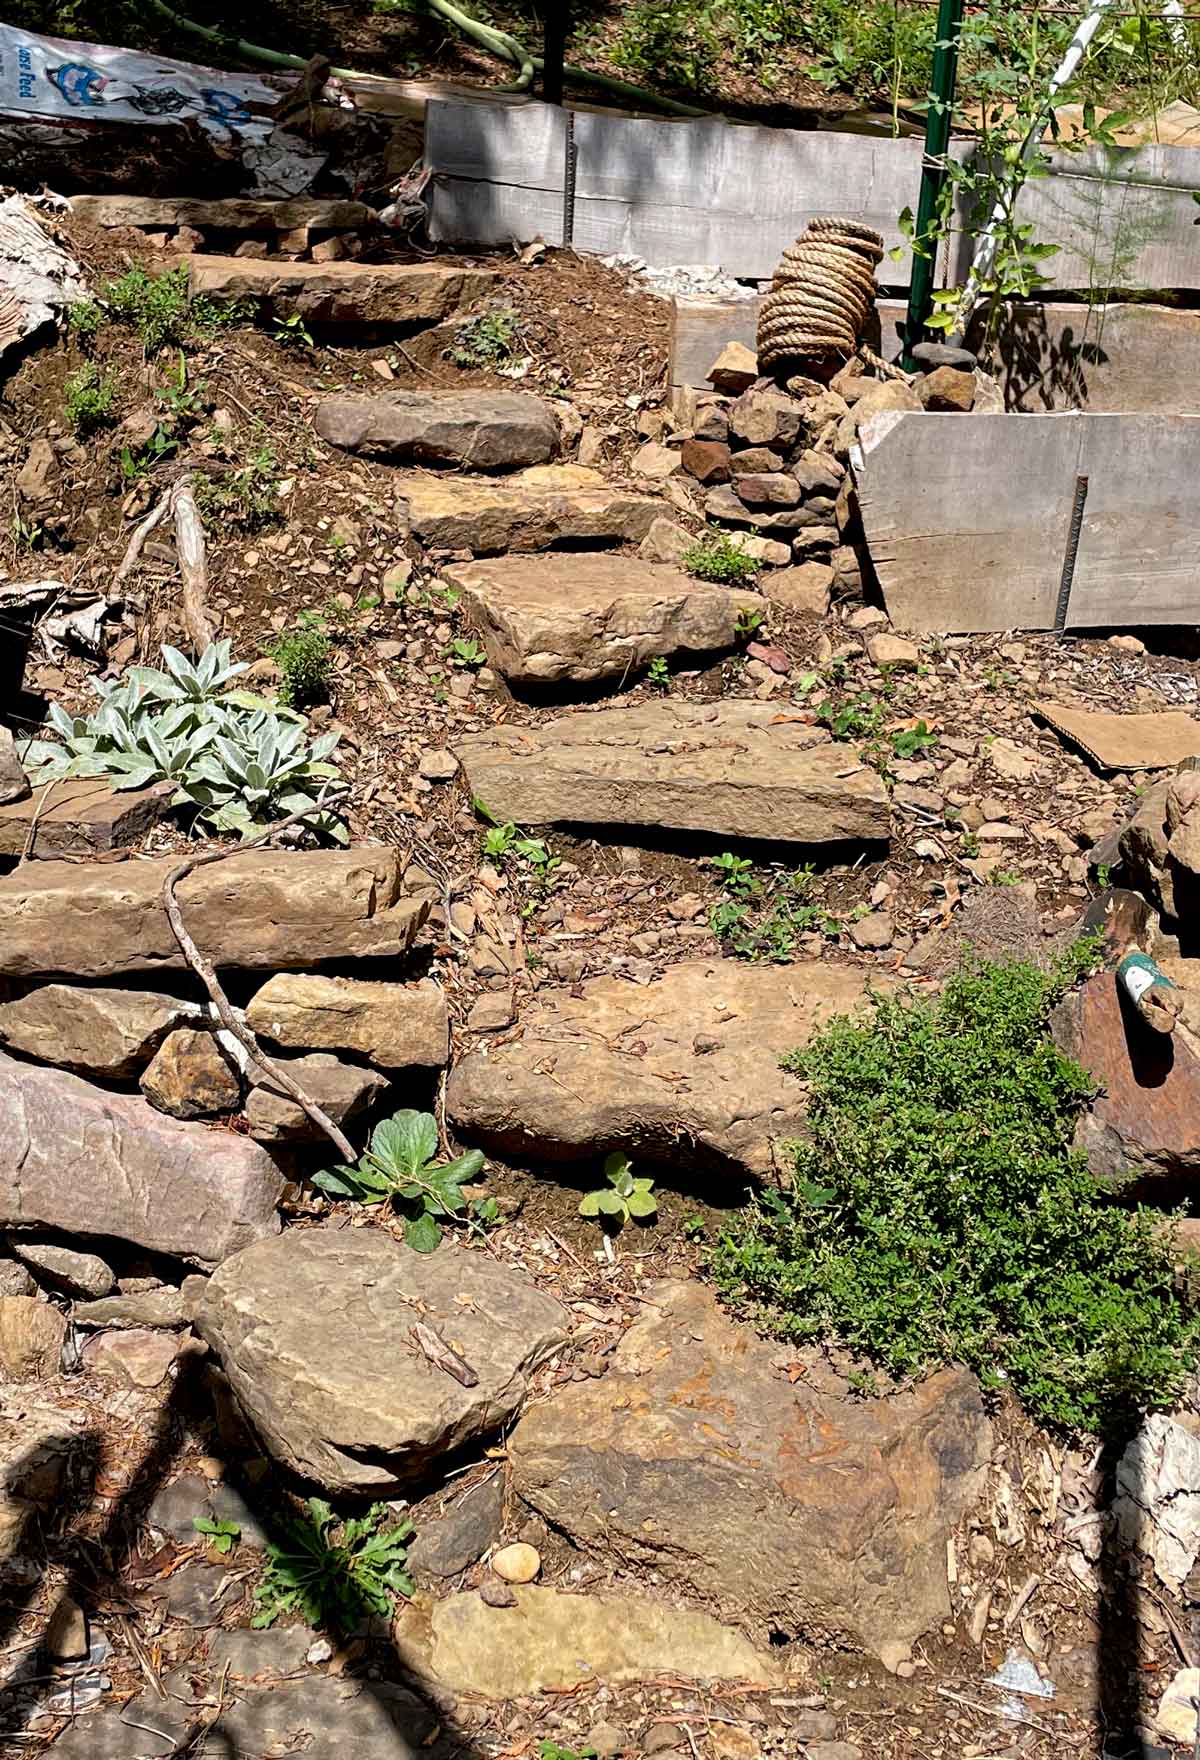 Stonework steps in my garden. This is the second set and has more steps than the first set. But these rocks aren't as hefty as the first ones.